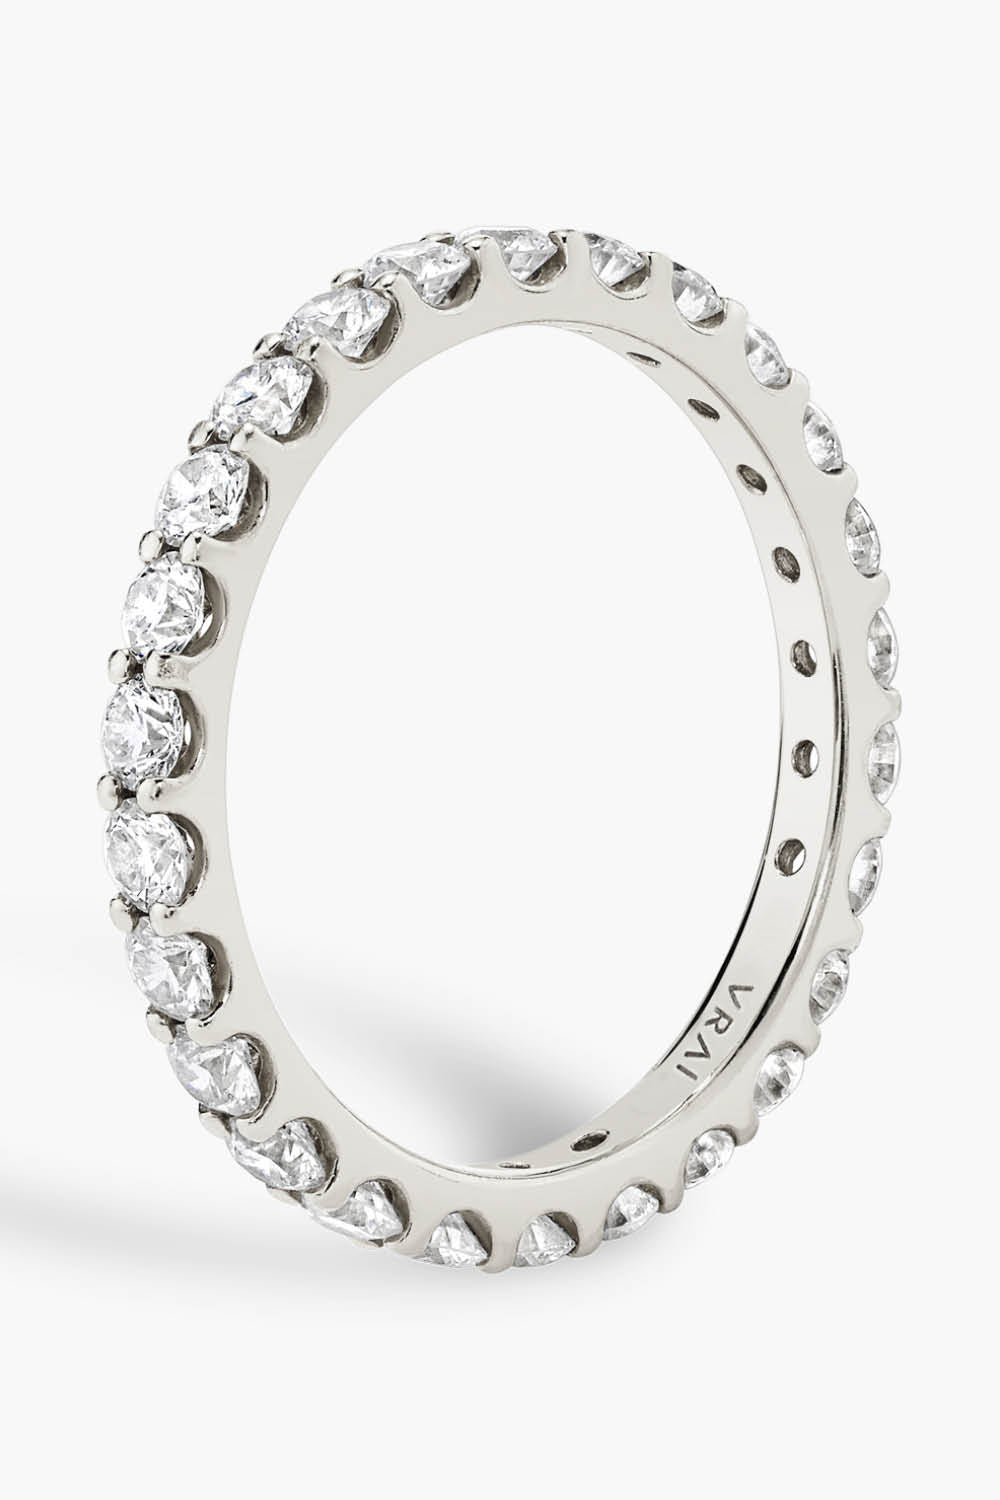 VRAI Round Eternity Band in White Gold